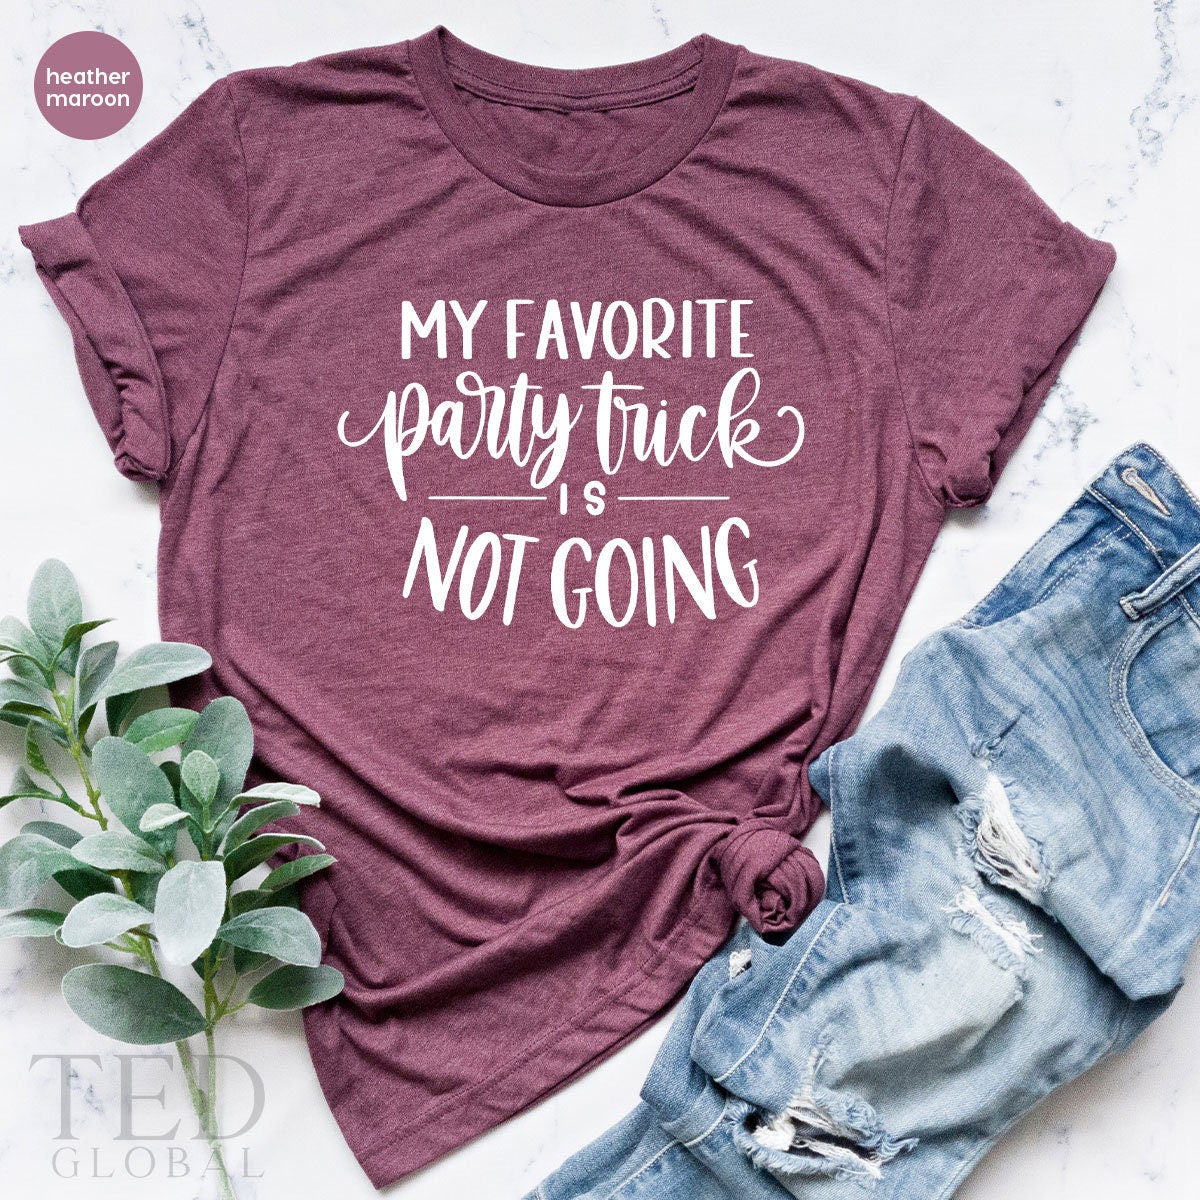 Funny Party Shirts, Sarcastic TShirt, Slogan T Shirt, Attitude Shirt, Party Humor Tee, My Favorite Party Trick Is Not Going Shirt - Fastdeliverytees.com